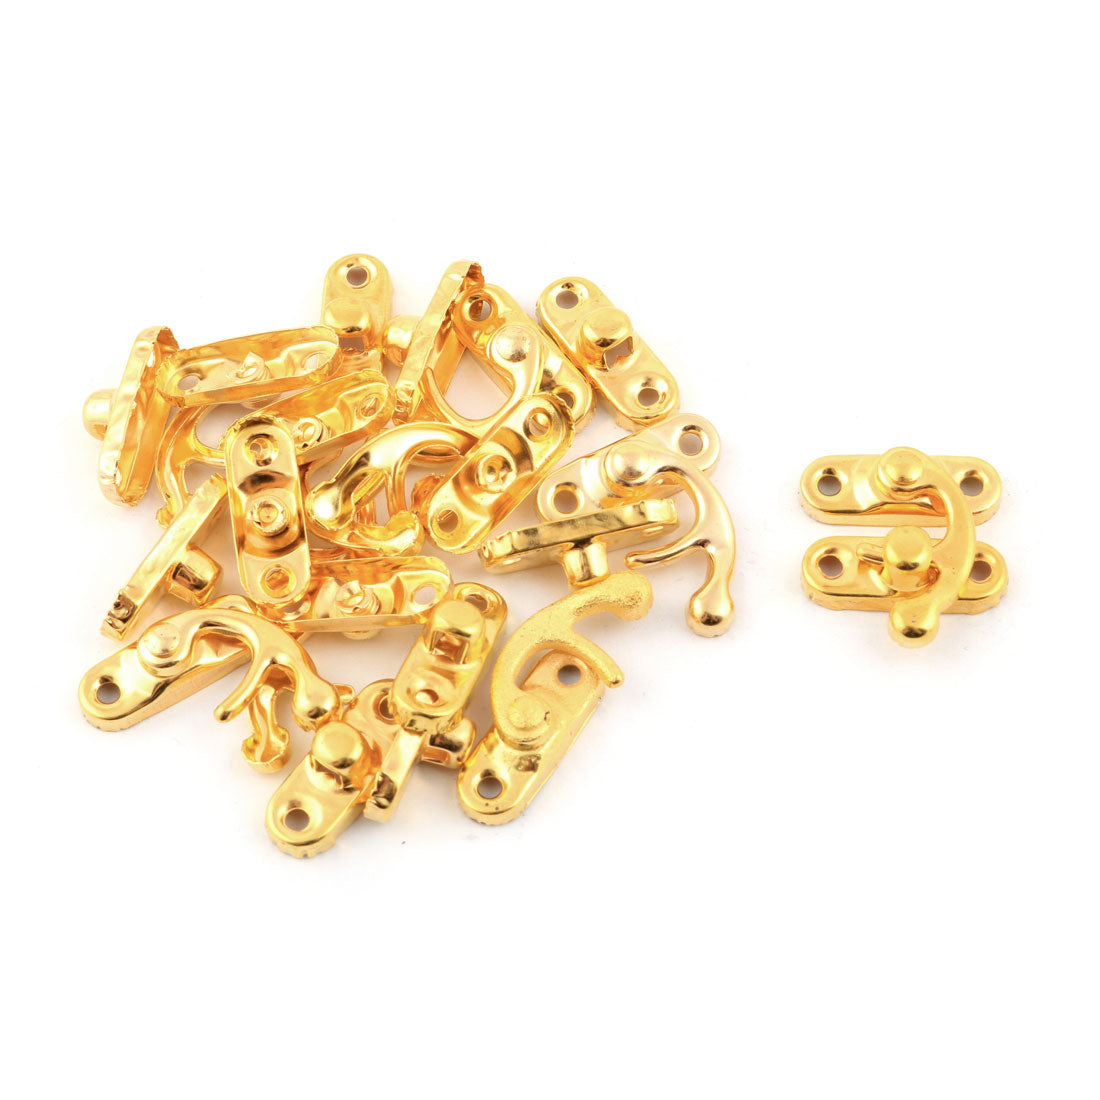 uxcell Uxcell Metal Retro Swing Bag Chest Suitcase Lock Clasp Closure Hasp Box Latch Gold Tone 10pcs